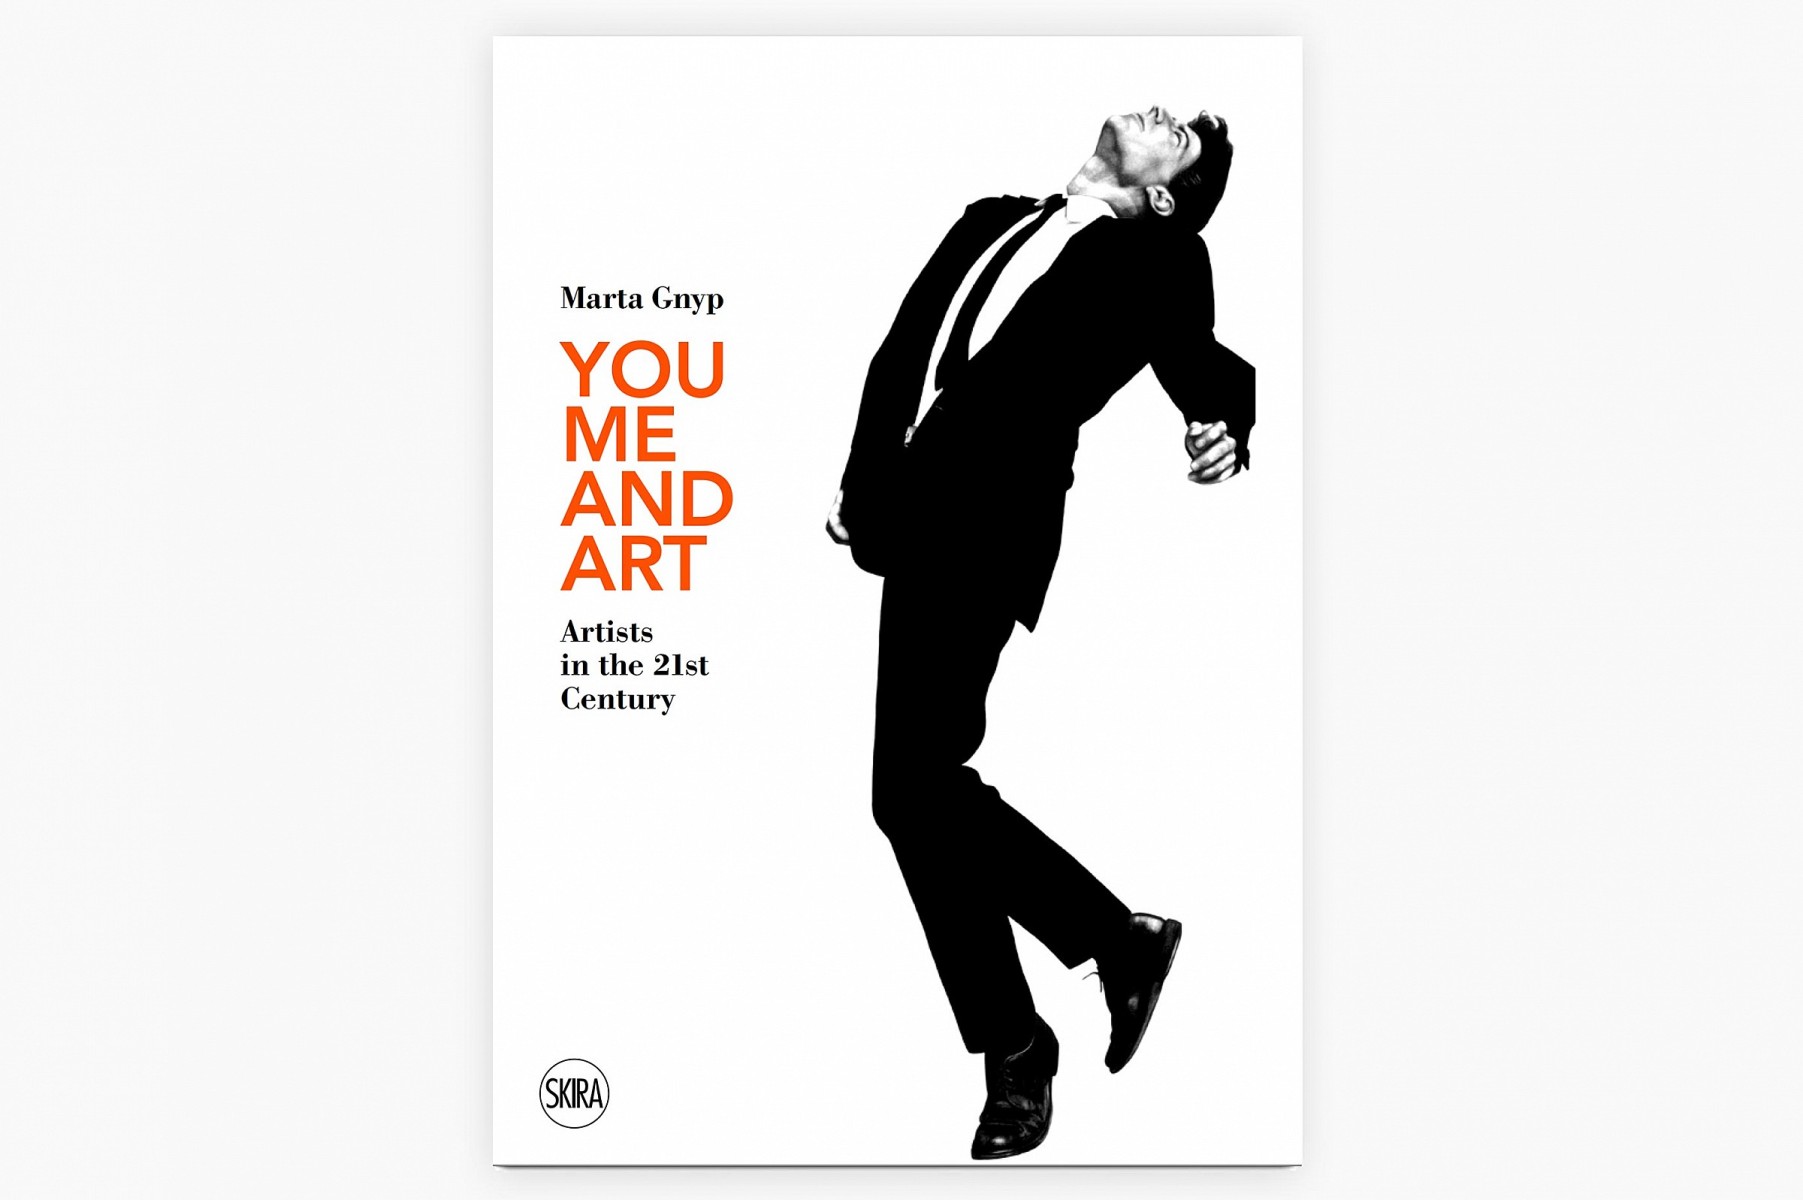 You, Me and Art. Artists in the 21st Century